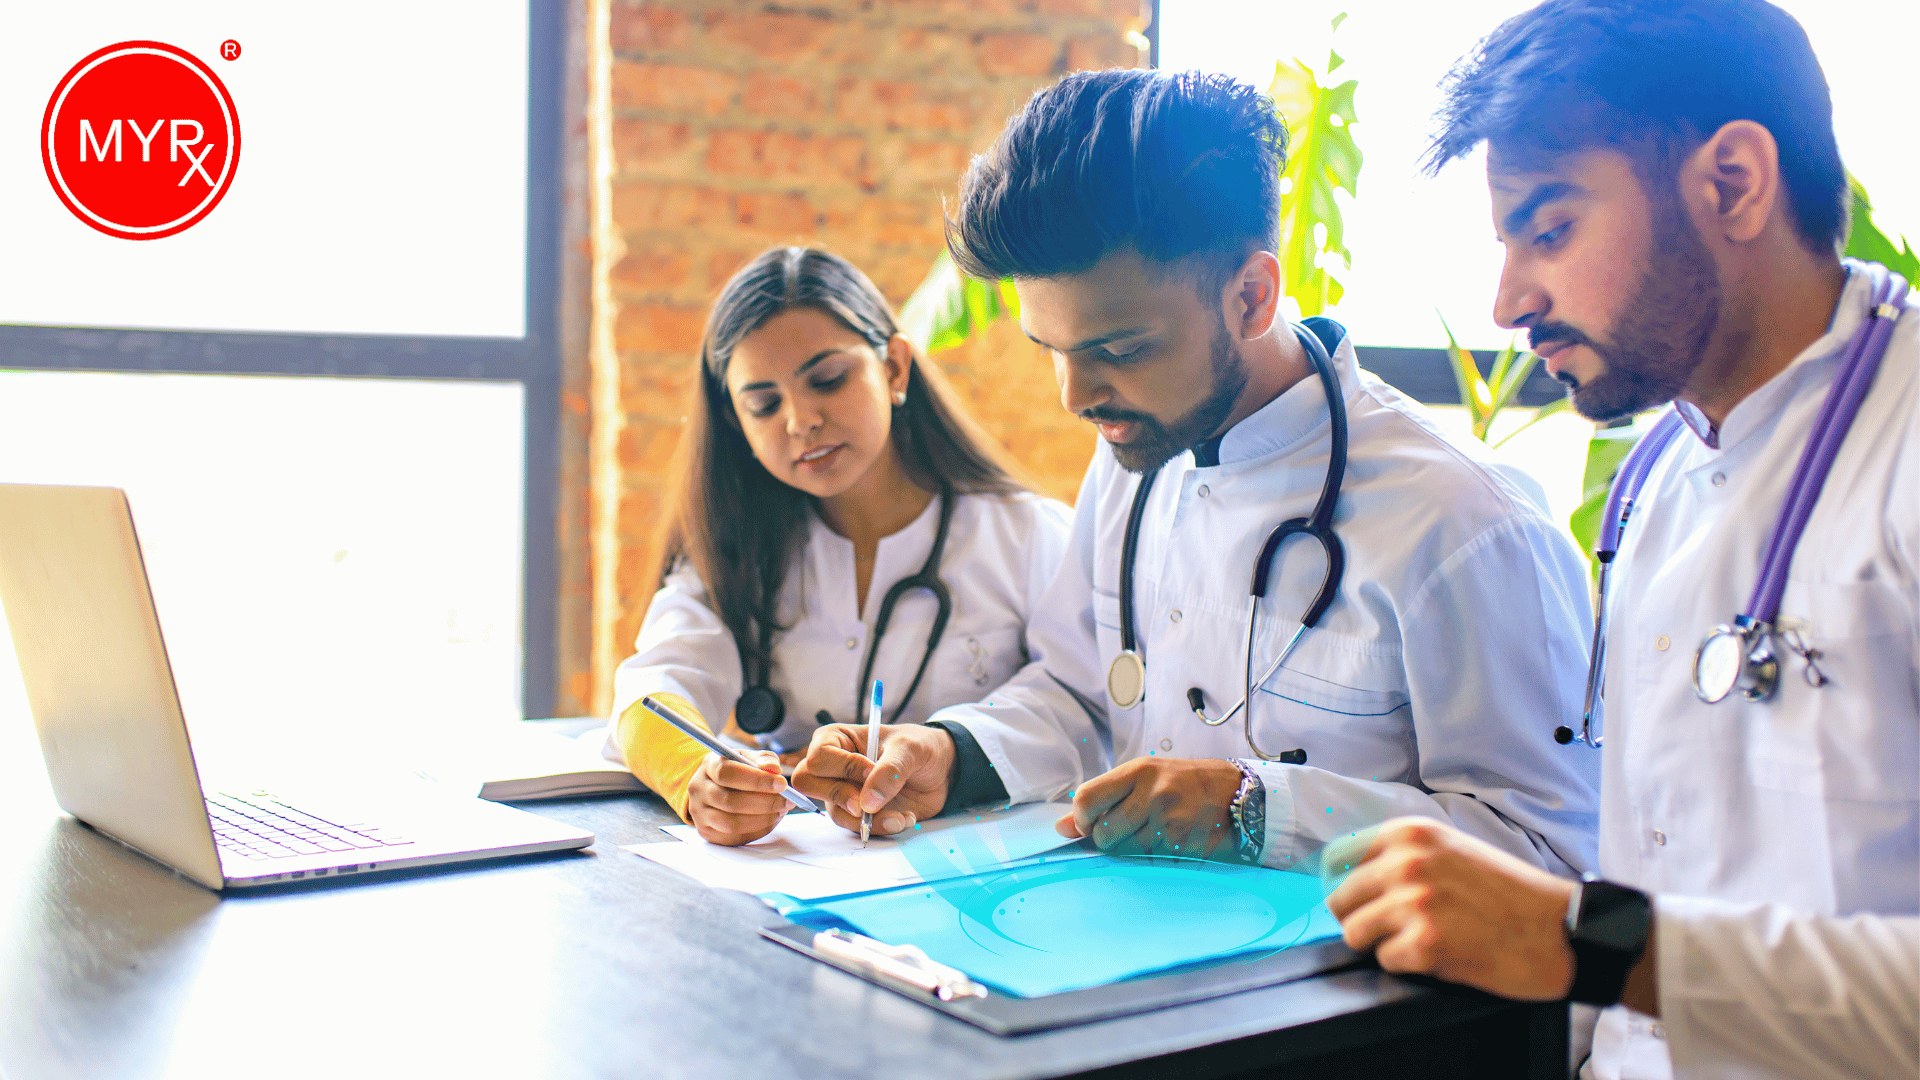 empowering-doctors-the-role-of-digital-transformation-in-enhancing-medical-education